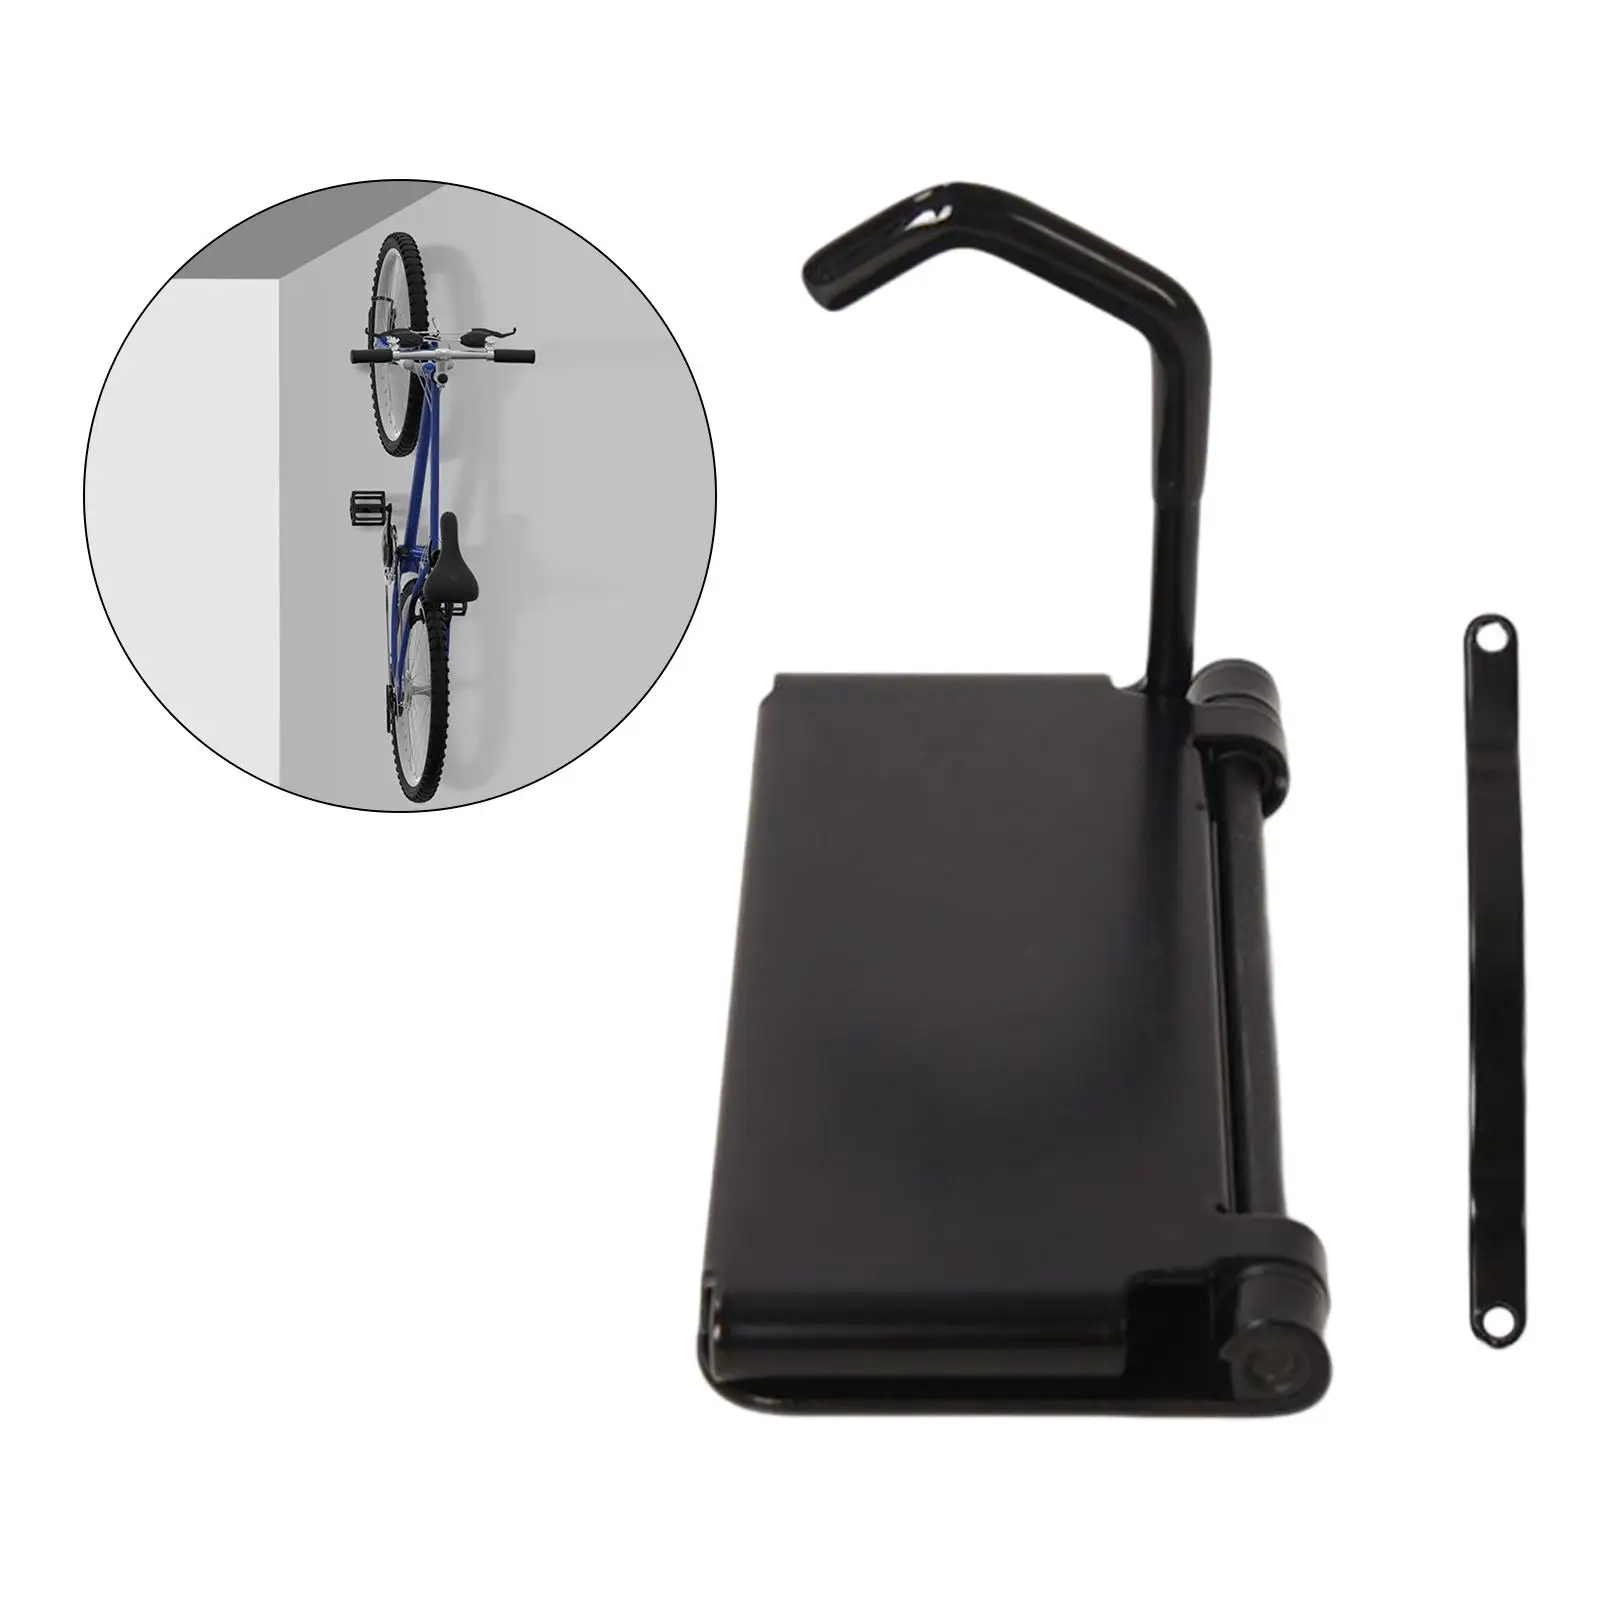 

Bike Stand Holder Cycling Accessories Adjustable Storage Hooks Holder Sturdy Durable Wall Mount for Apartment MTB Home Repairing